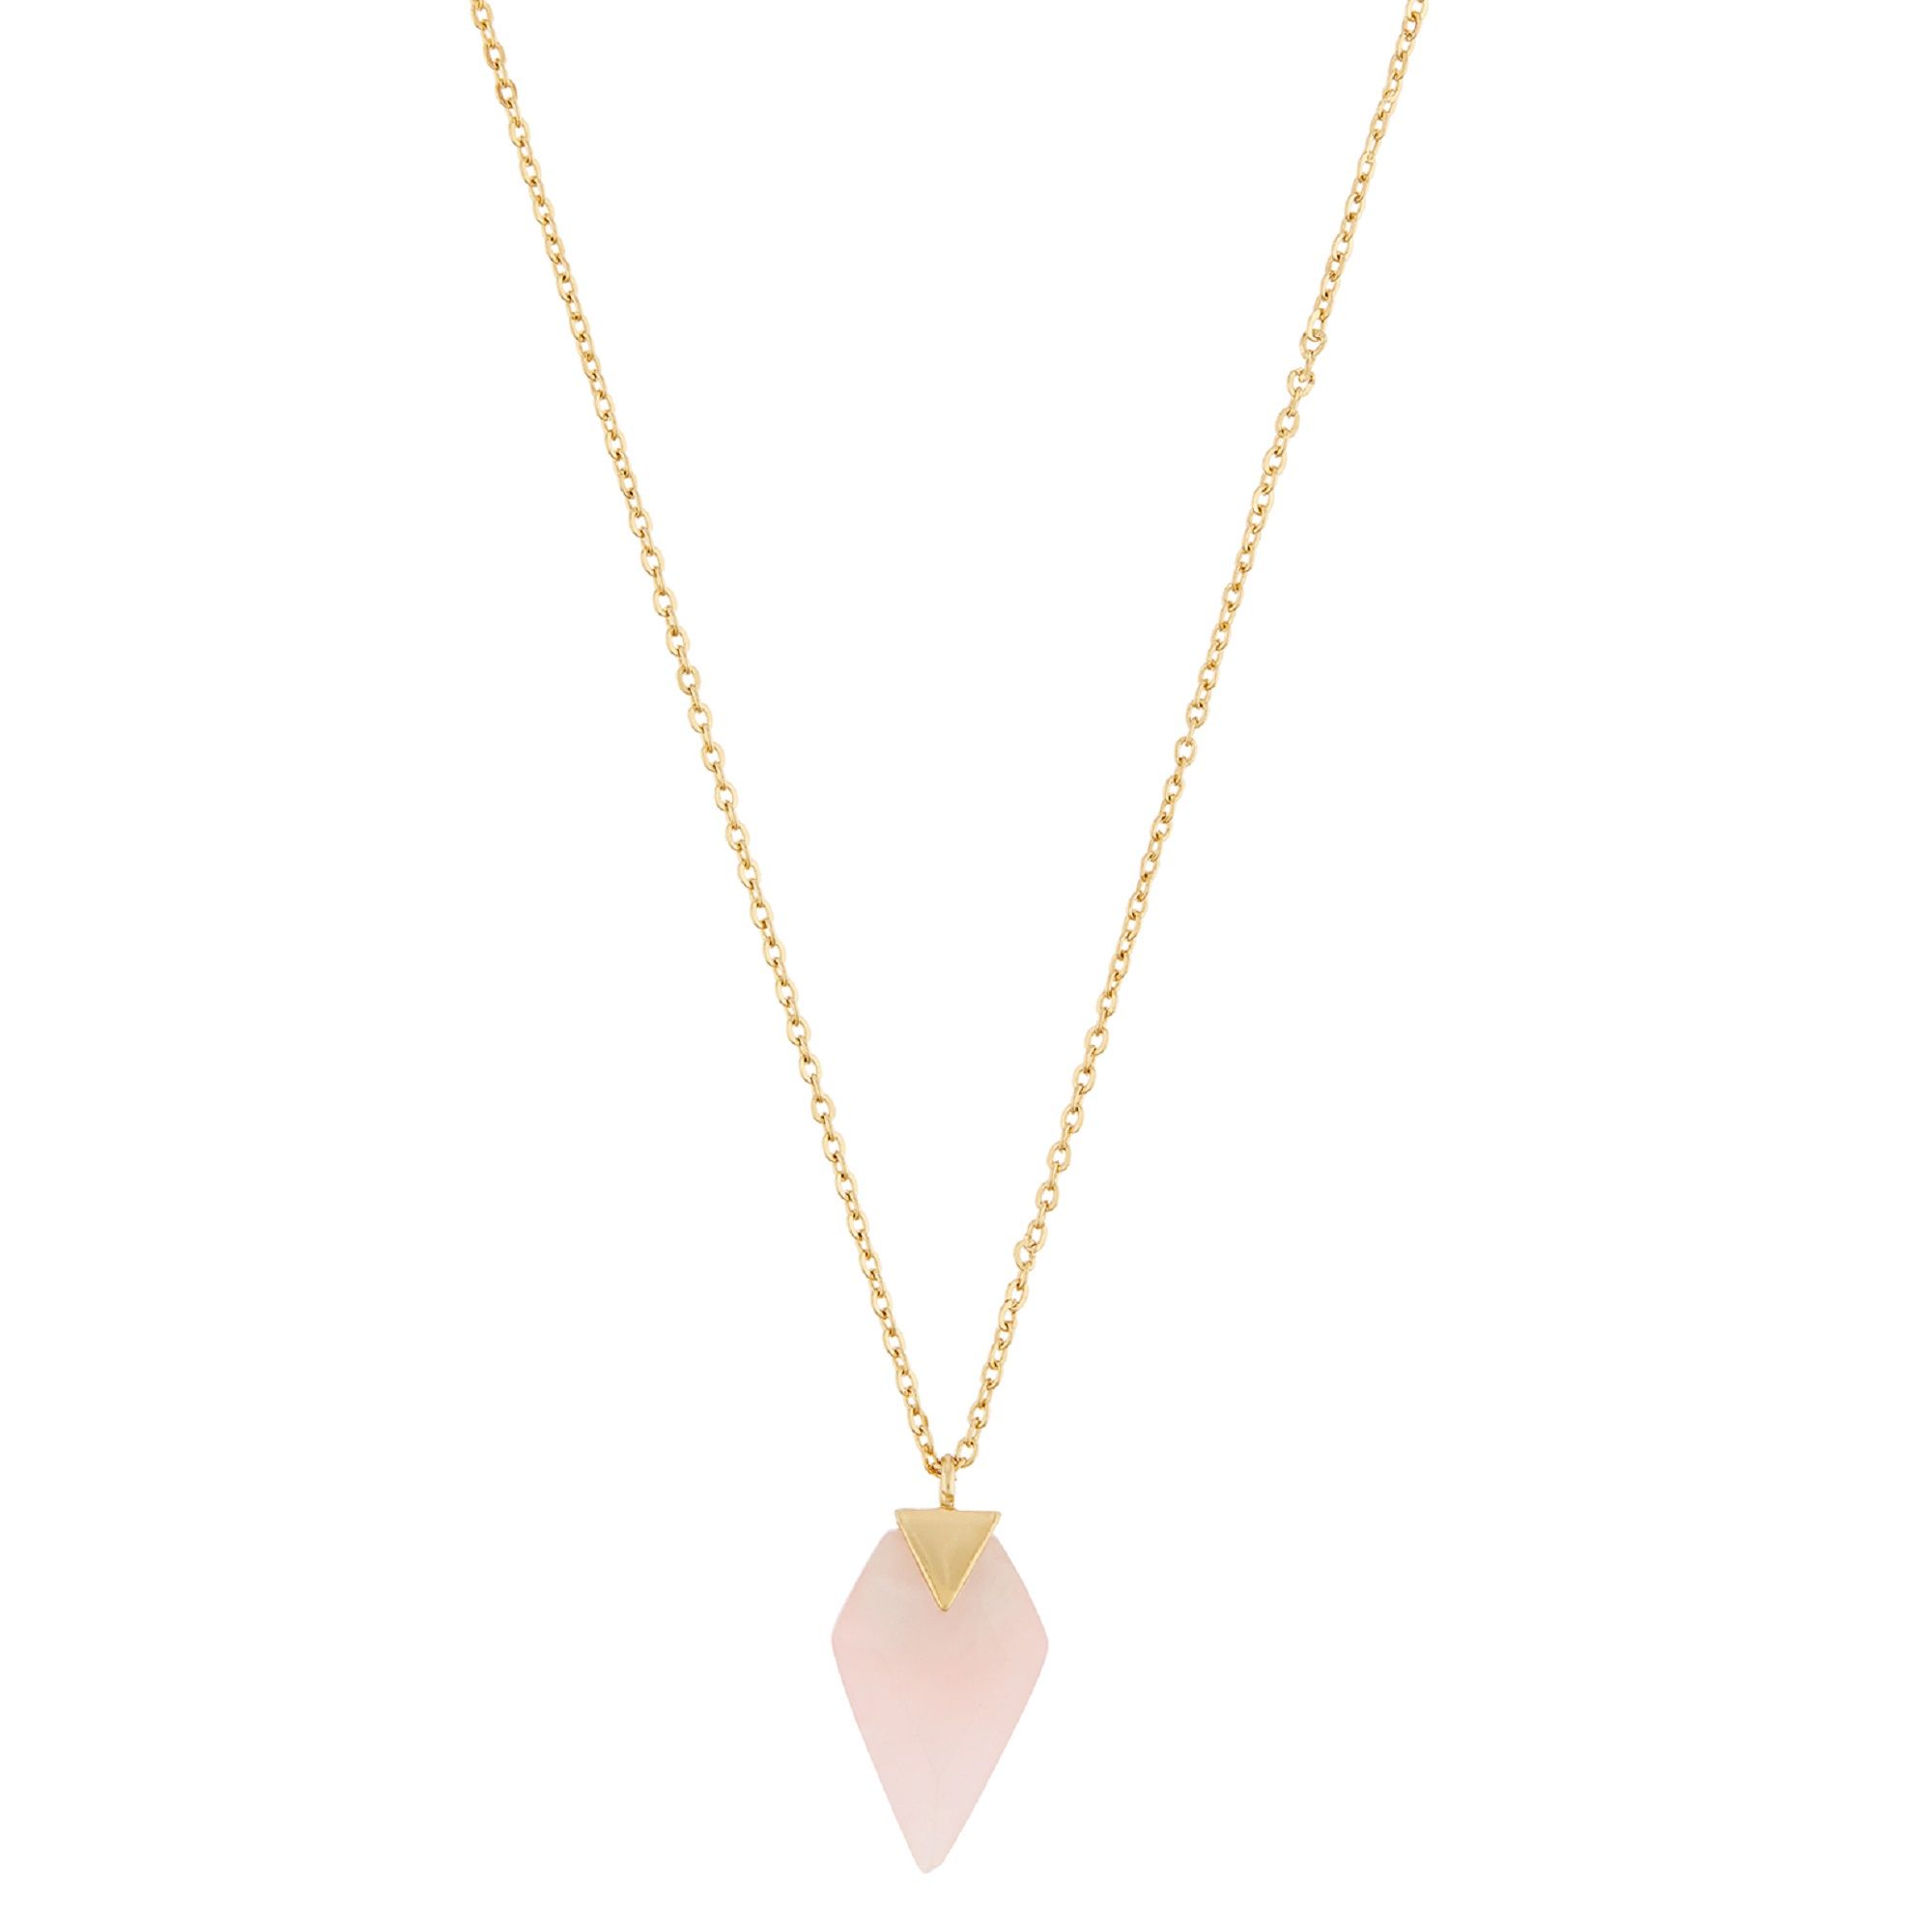 13 Rose Quartz Necklaces You'll Be Tickled Pink To Wear